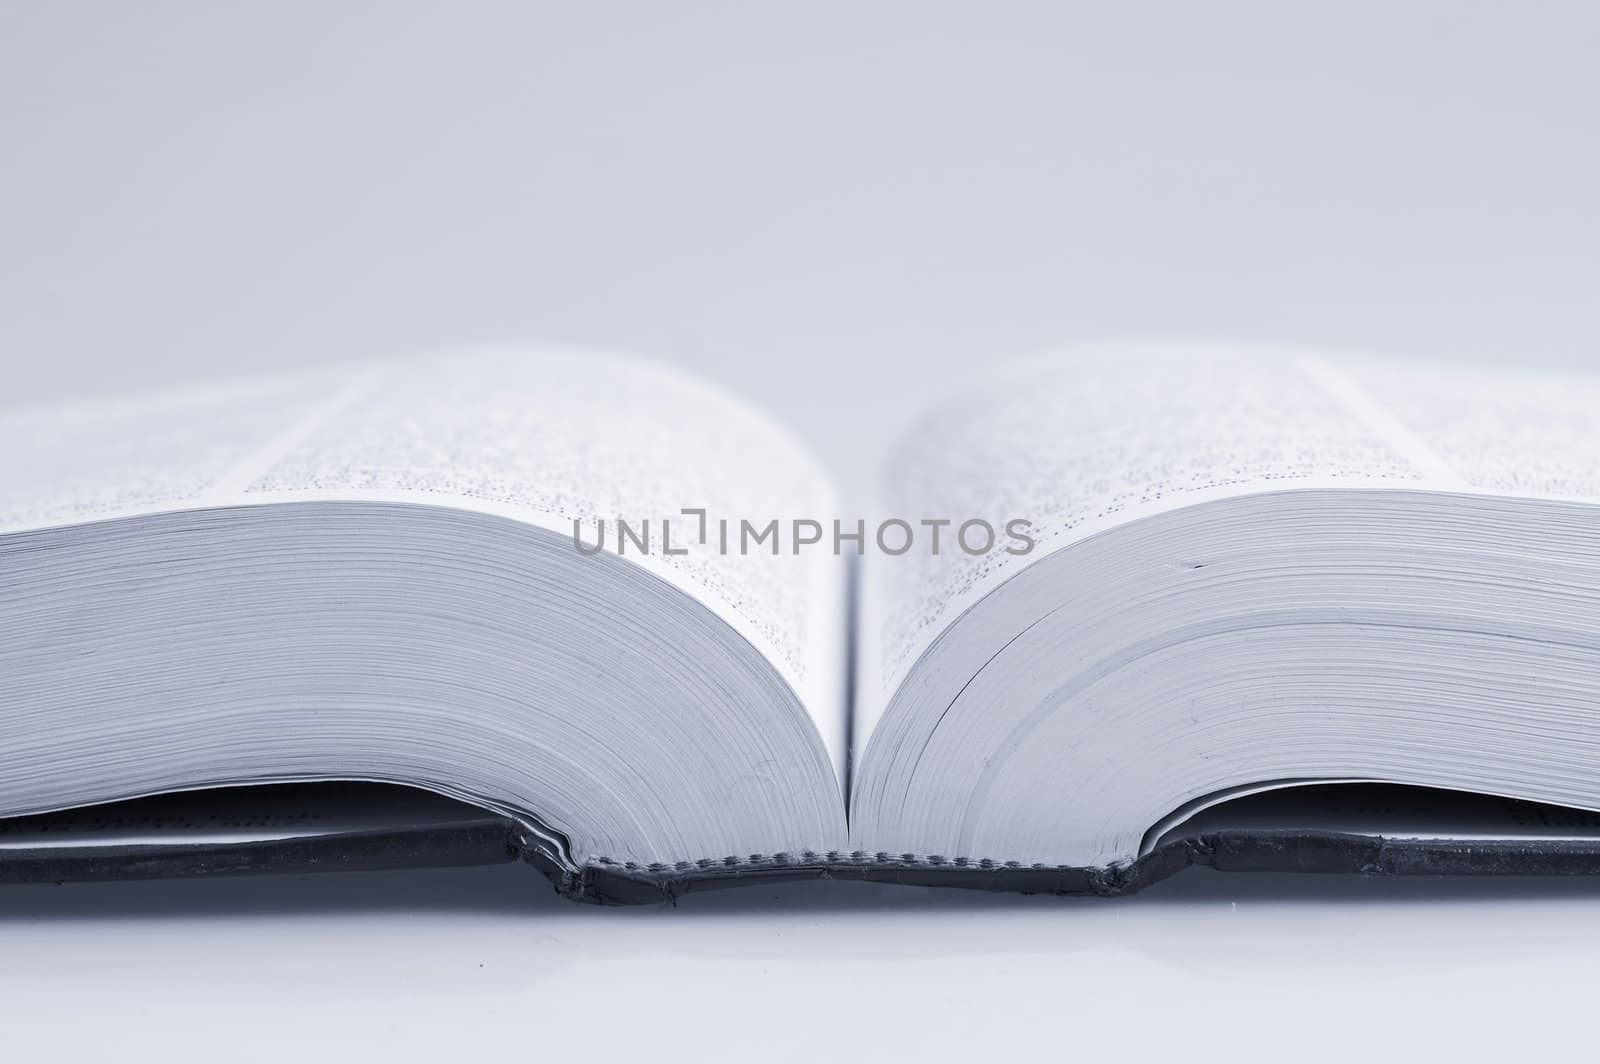 a macro picture of a book spine